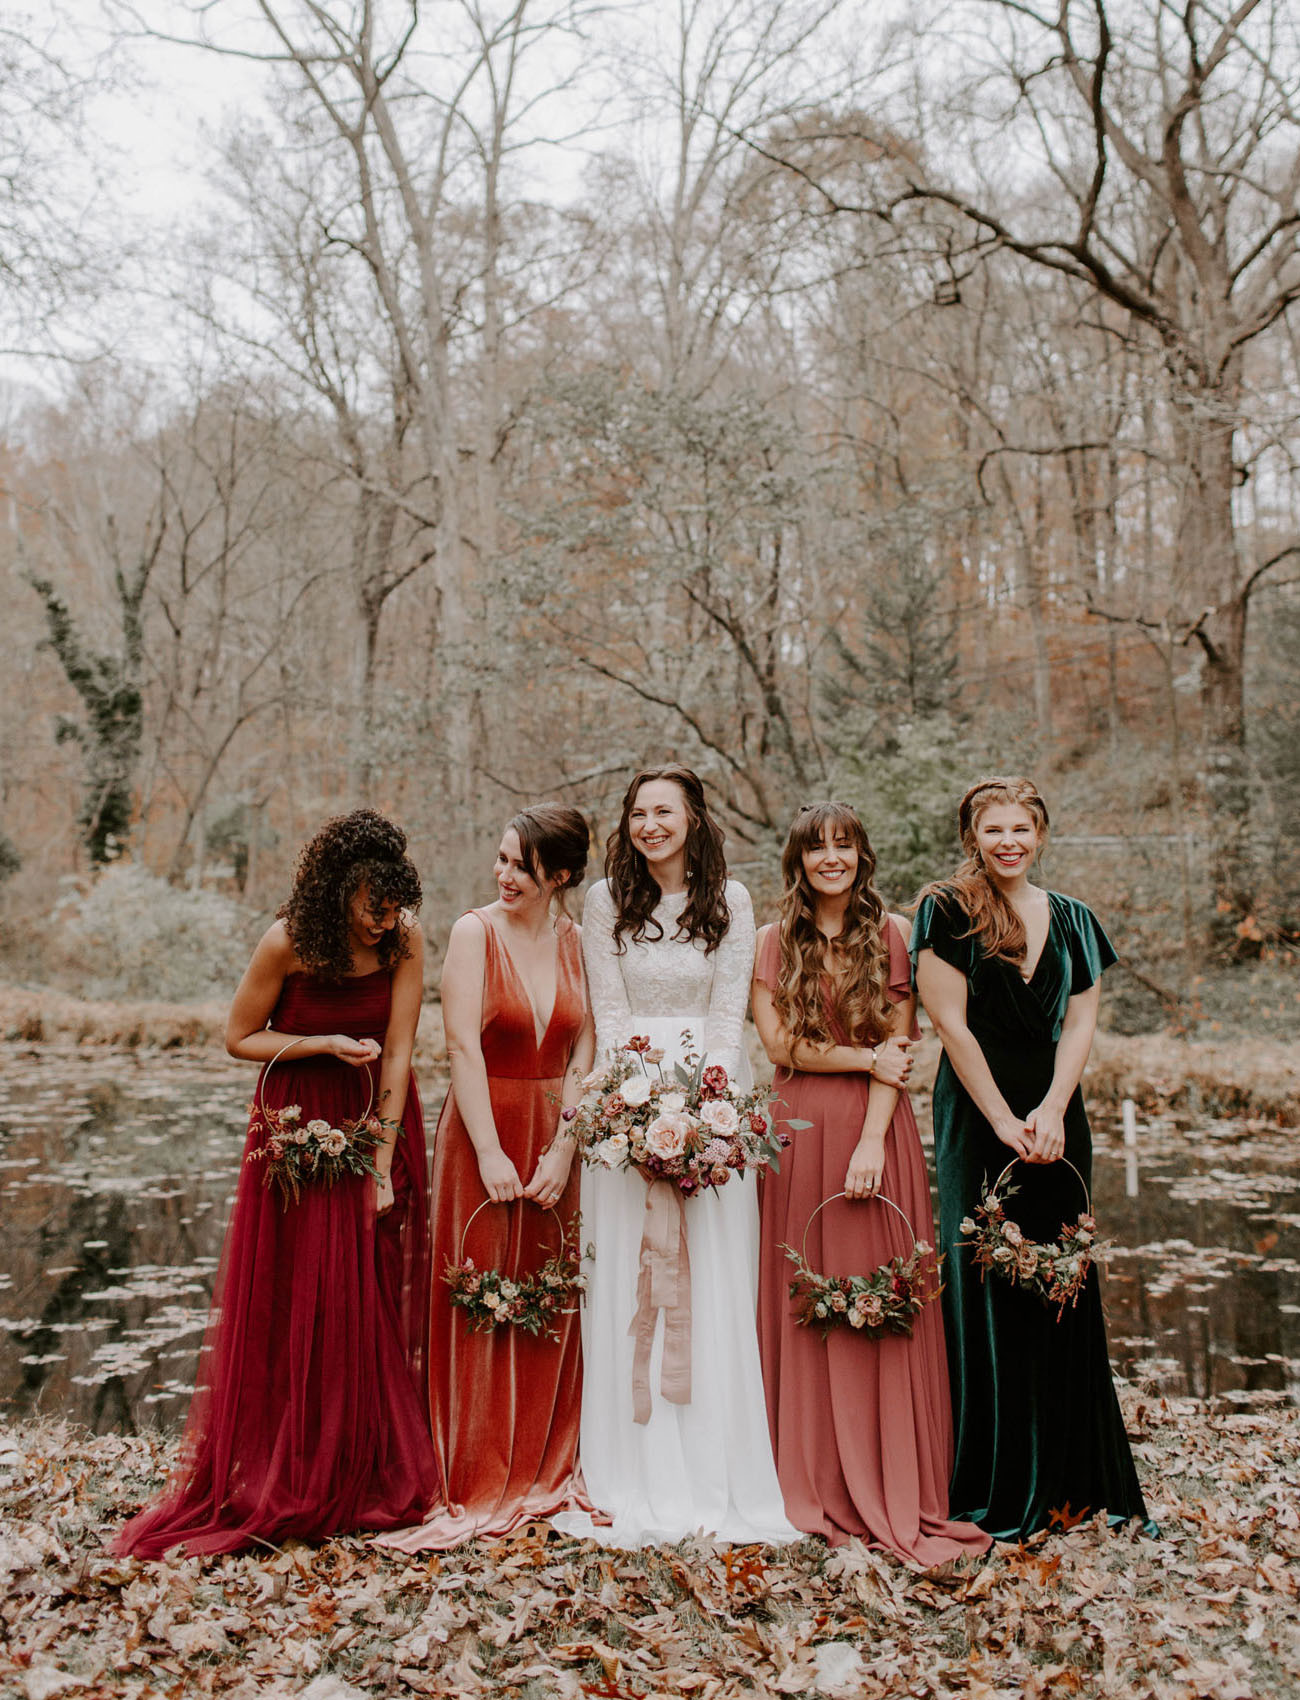 Fall Wedding Bridesmaid Dresses
 You ve Got to See the Bridesmaids in Jewel Tones Floral